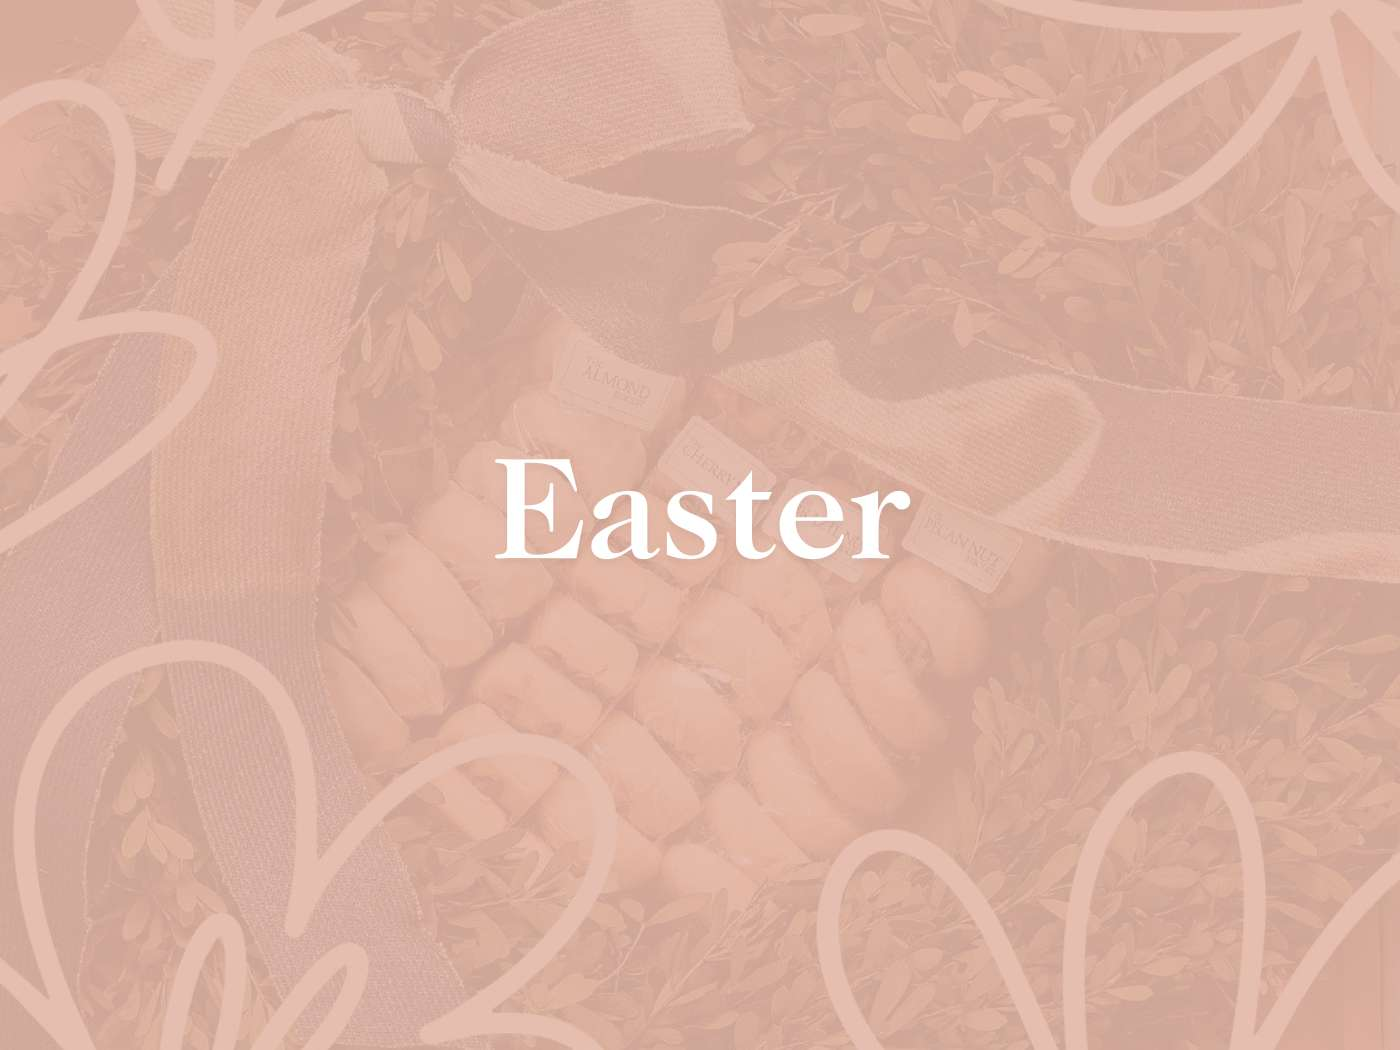 Easter-themed promotional image with pastel tones and decorative elements, part of the Easter Collection offered by Fabulous Flowers and Gifts.